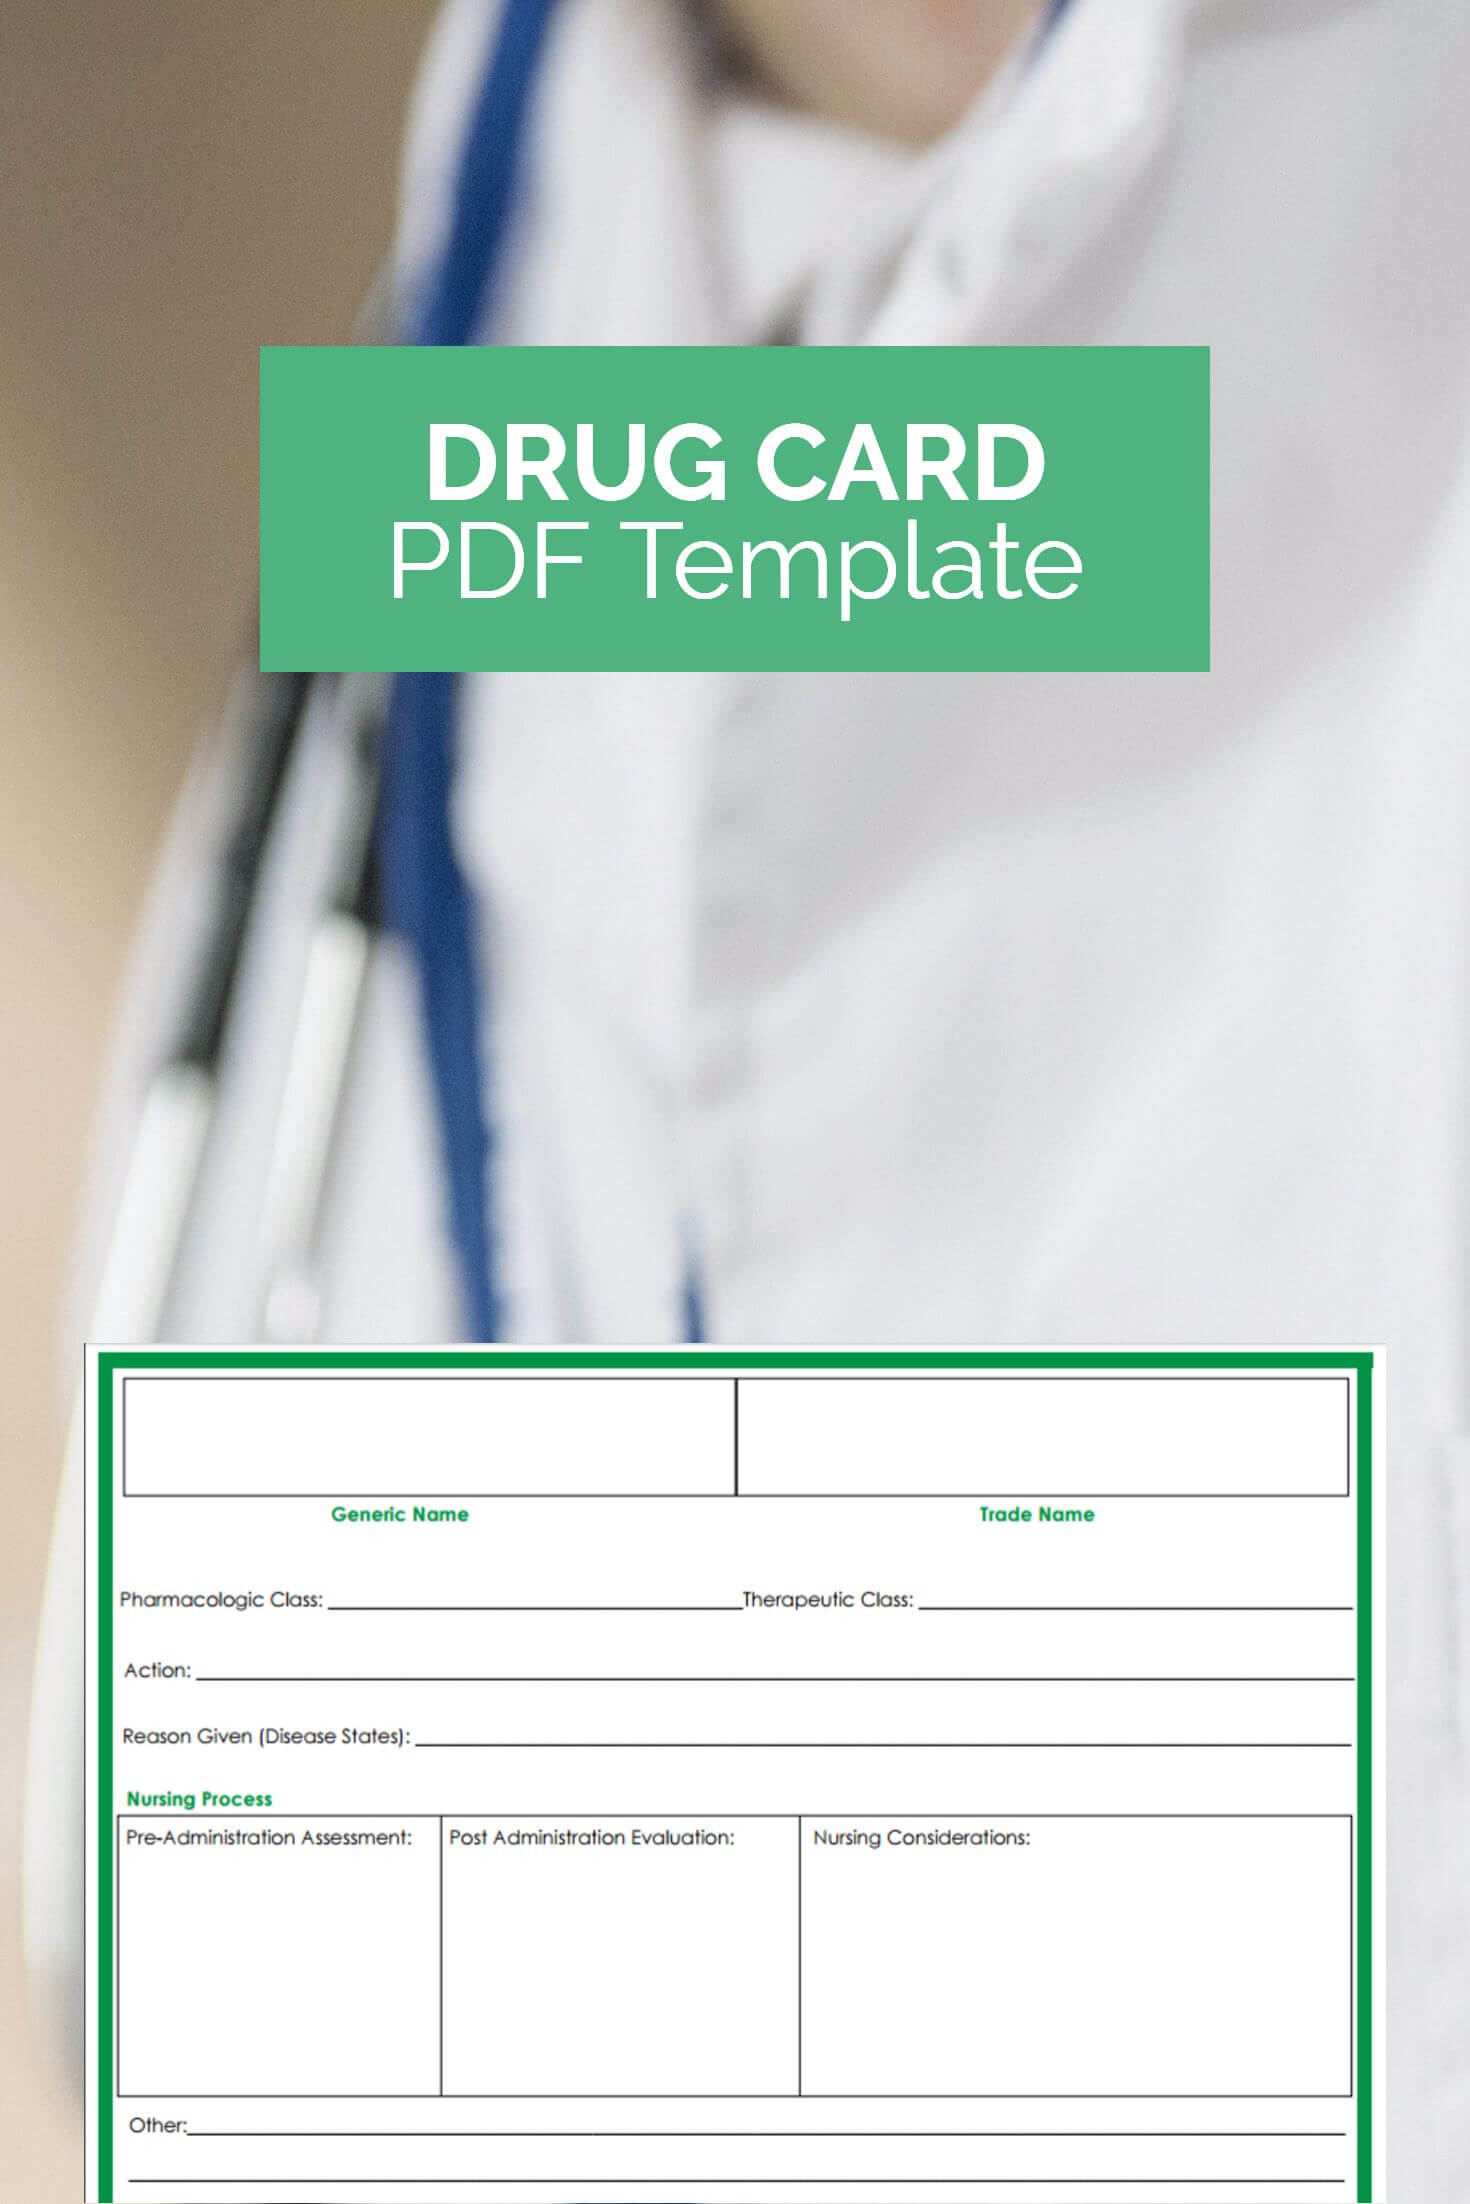 Want A Free Drug Card Template That Can Make Studying Much Pertaining To Pharmacology Drug Card Template